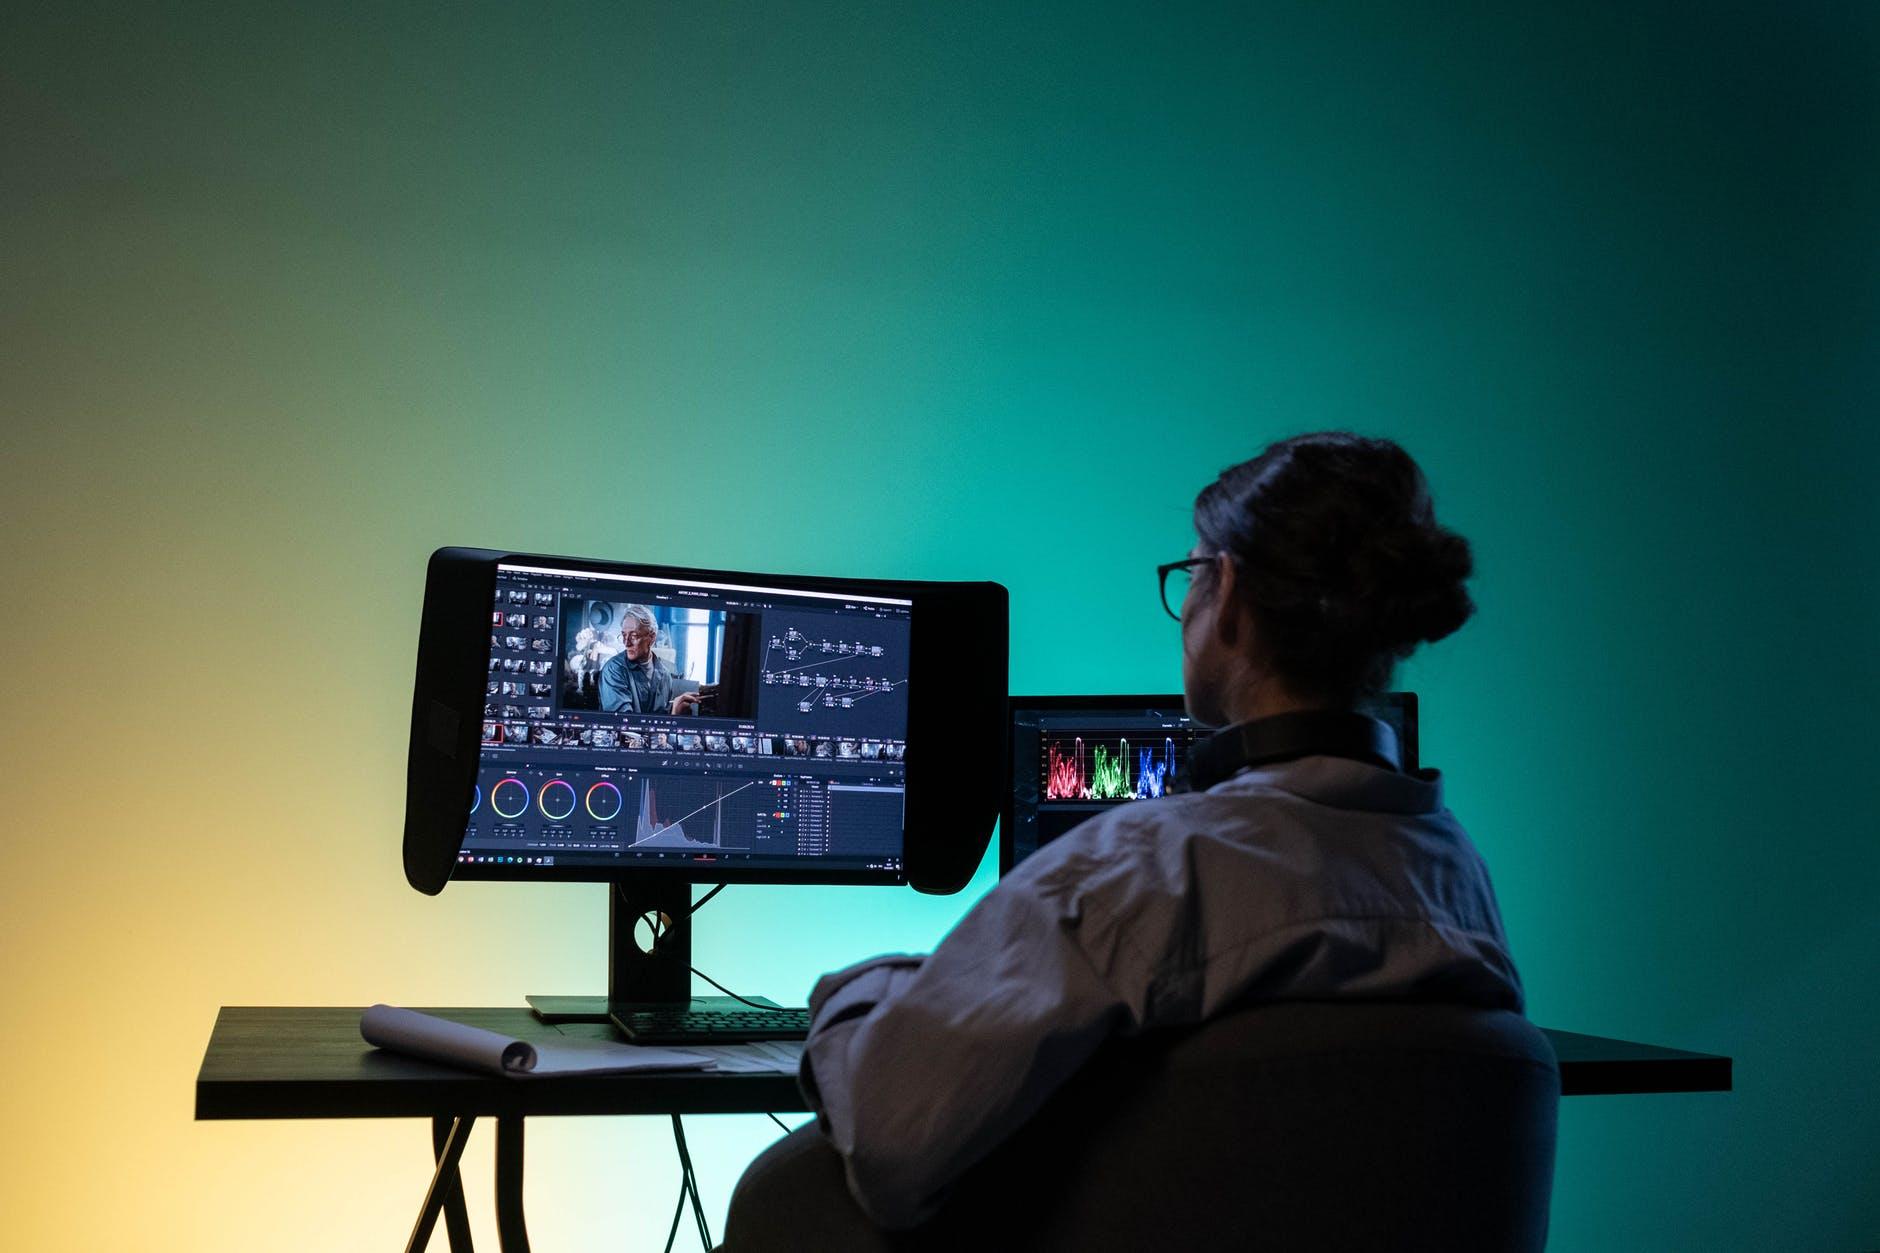 5 Factors To Determine Video Editing Cost in a Professional Way